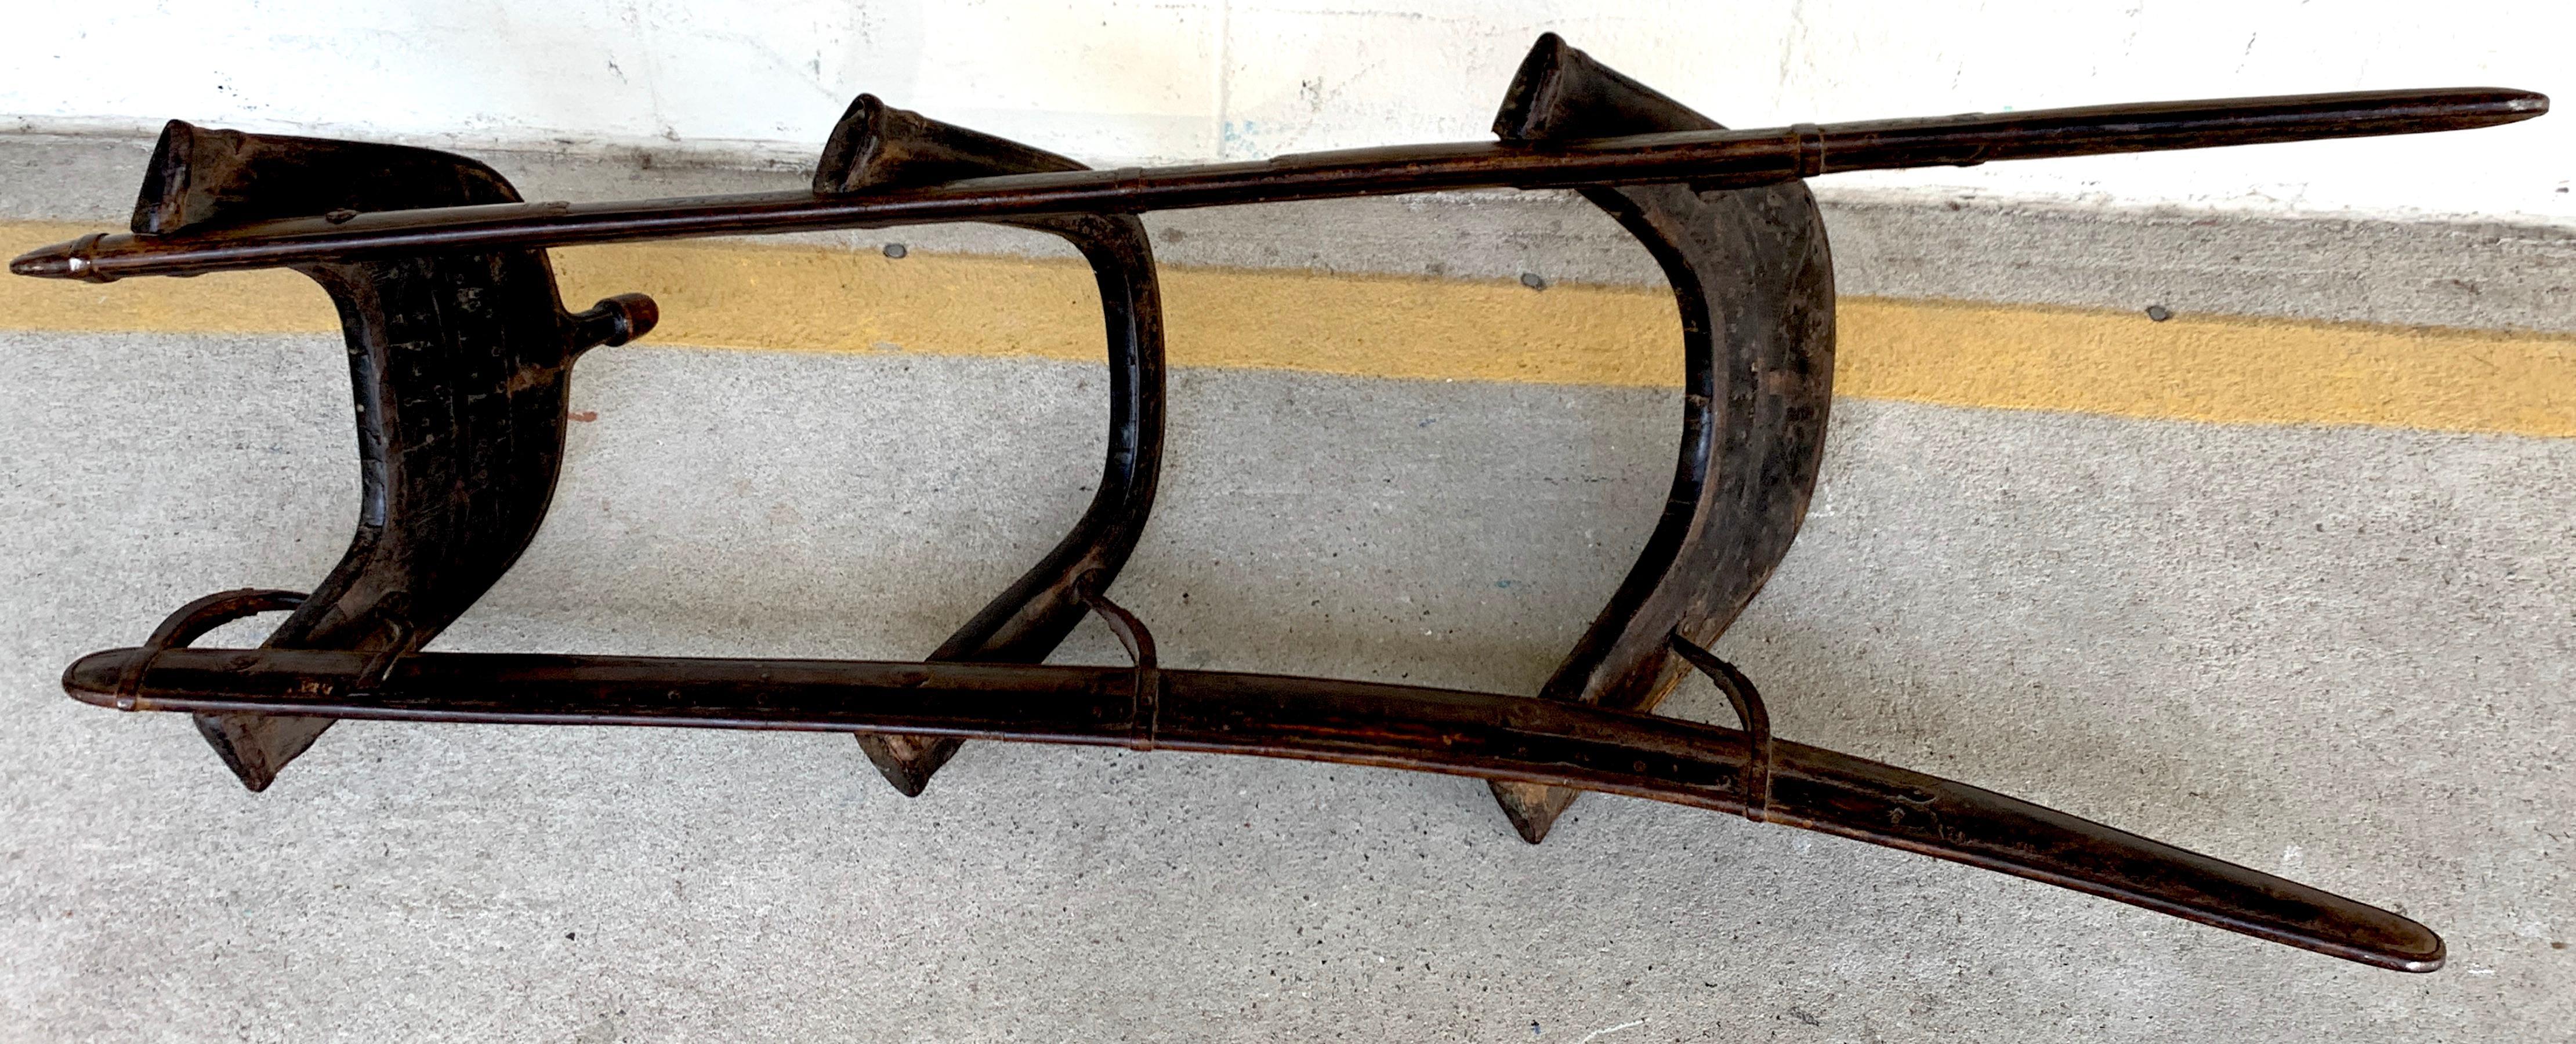 Moorish Brass Inlaid Camel Saddle /Towel Rack In Good Condition For Sale In West Palm Beach, FL